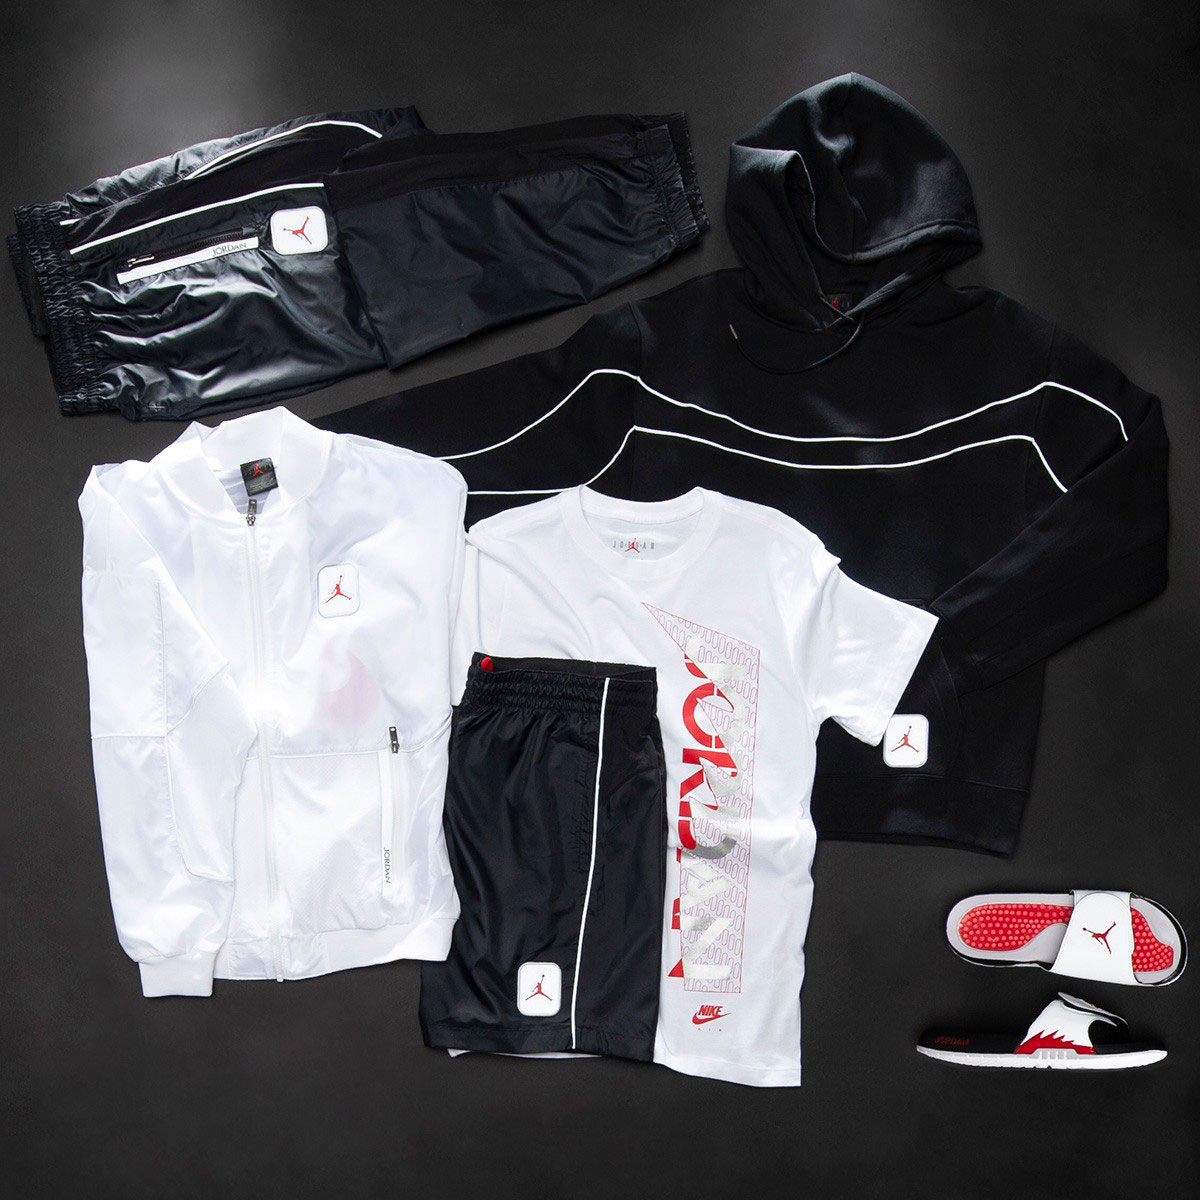 air-jordan-5-fire-red-3m-silver-tongue-clothing-outfits